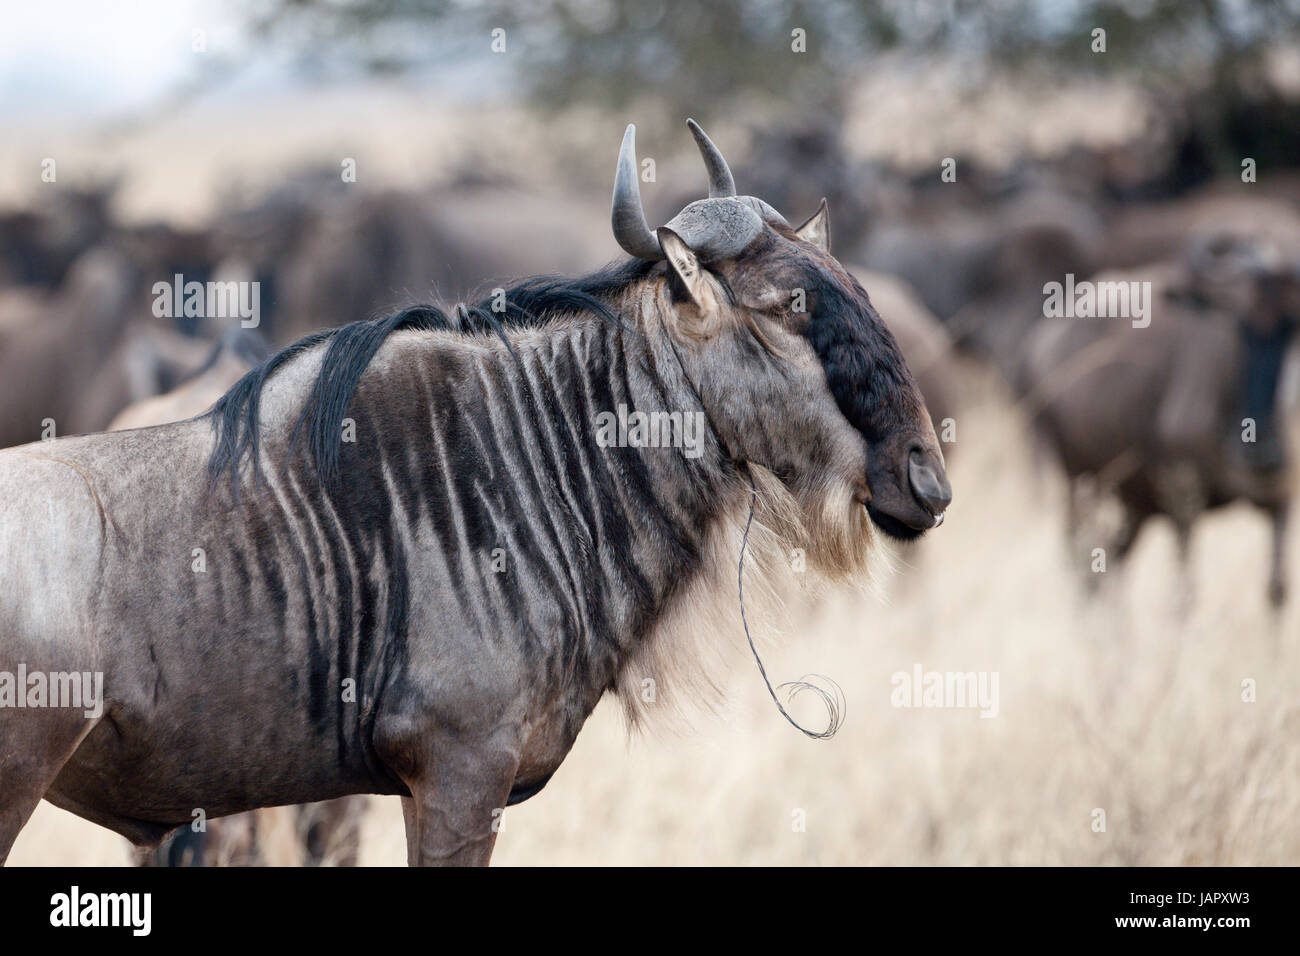 Wildebeest (Connochaetes taurinus) standing with snare from illegal poaching around his neck, Serengeti national park, Tanzania Stock Photo